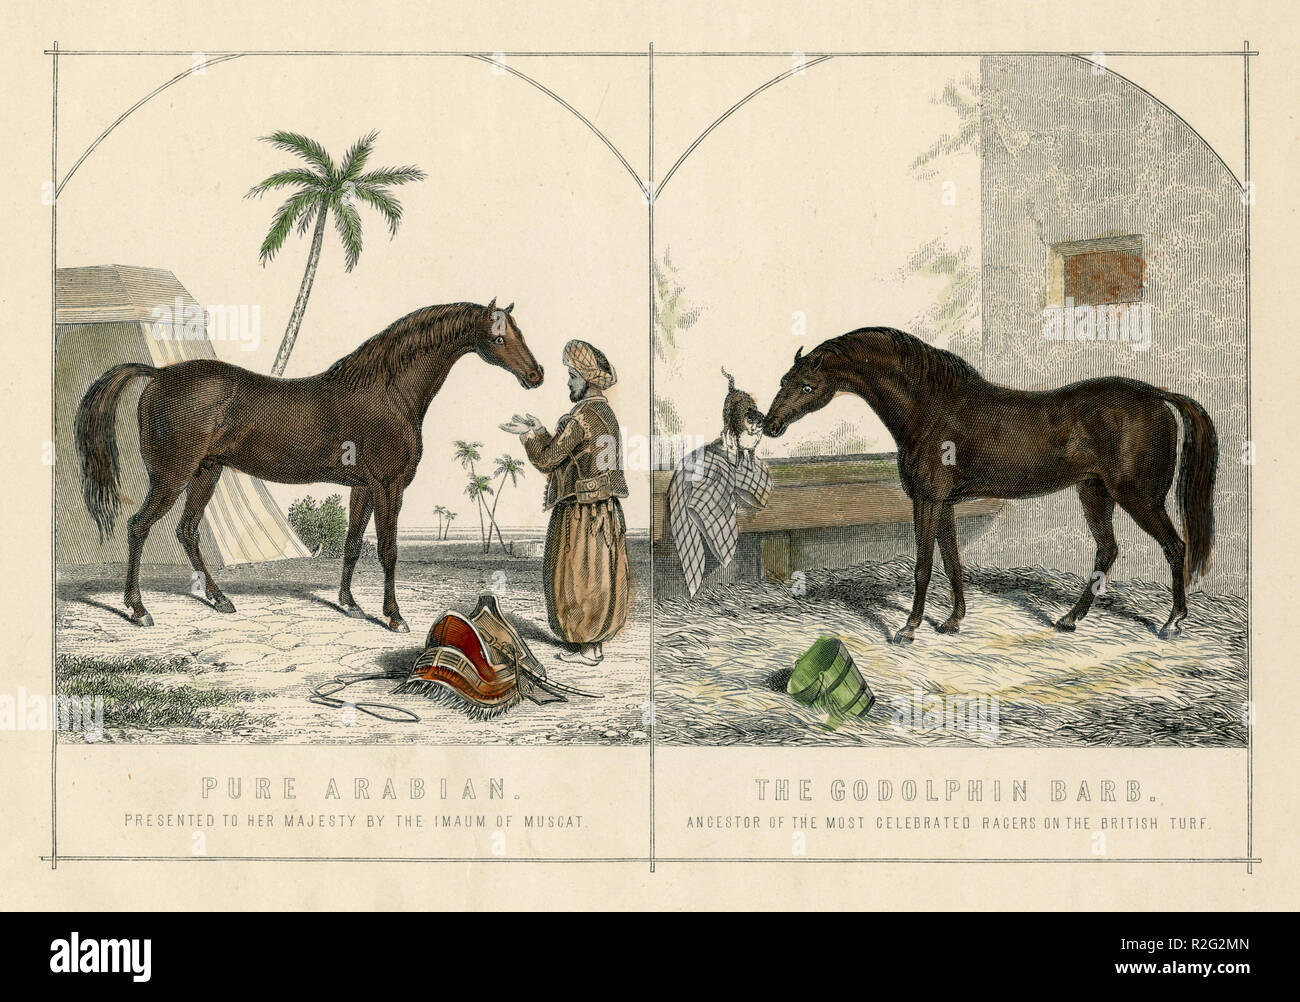 Arabian horses: 'Pure Arabian. Presented to her Majesty by the Imaum of Muscat' (left) and Godolphin Arabian oder Godolphin Barb (* ca. 1724/1725; † Dezember 1753), stallion, 'The Godolphin Barb. Ancestor of the most celebrated racers on the british turf.', William Mackenzie Stock Photo